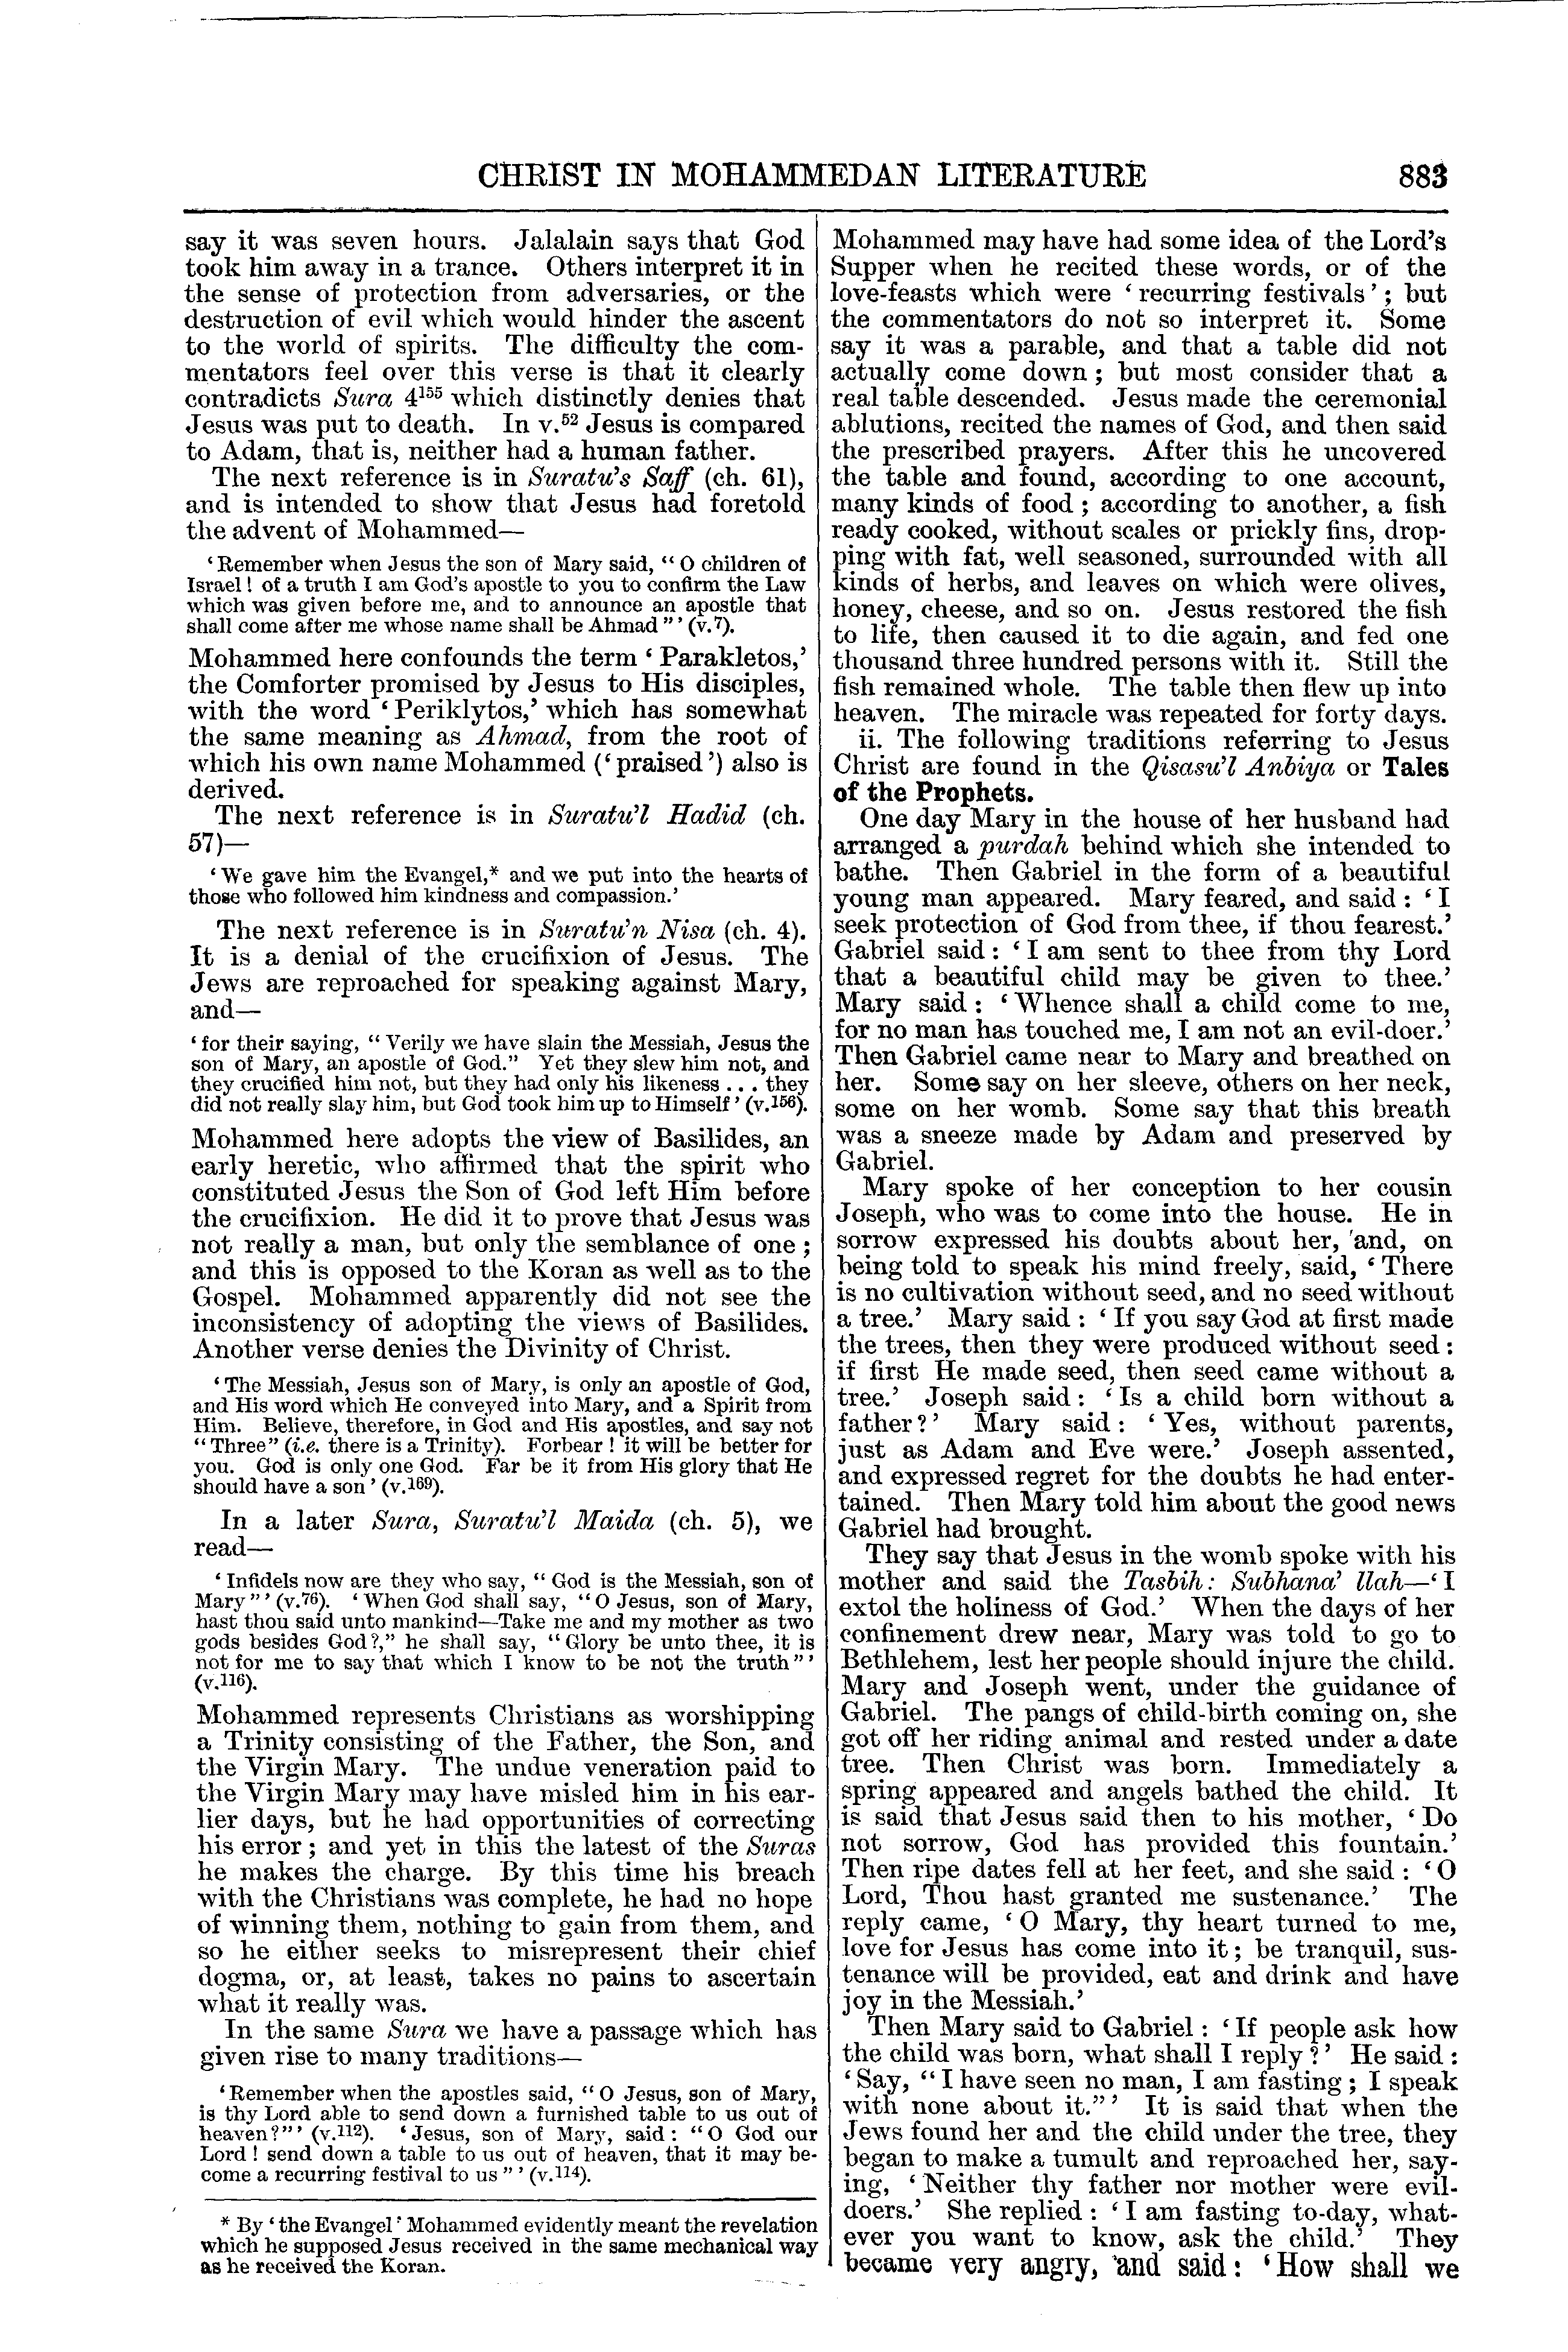 Image of page 883